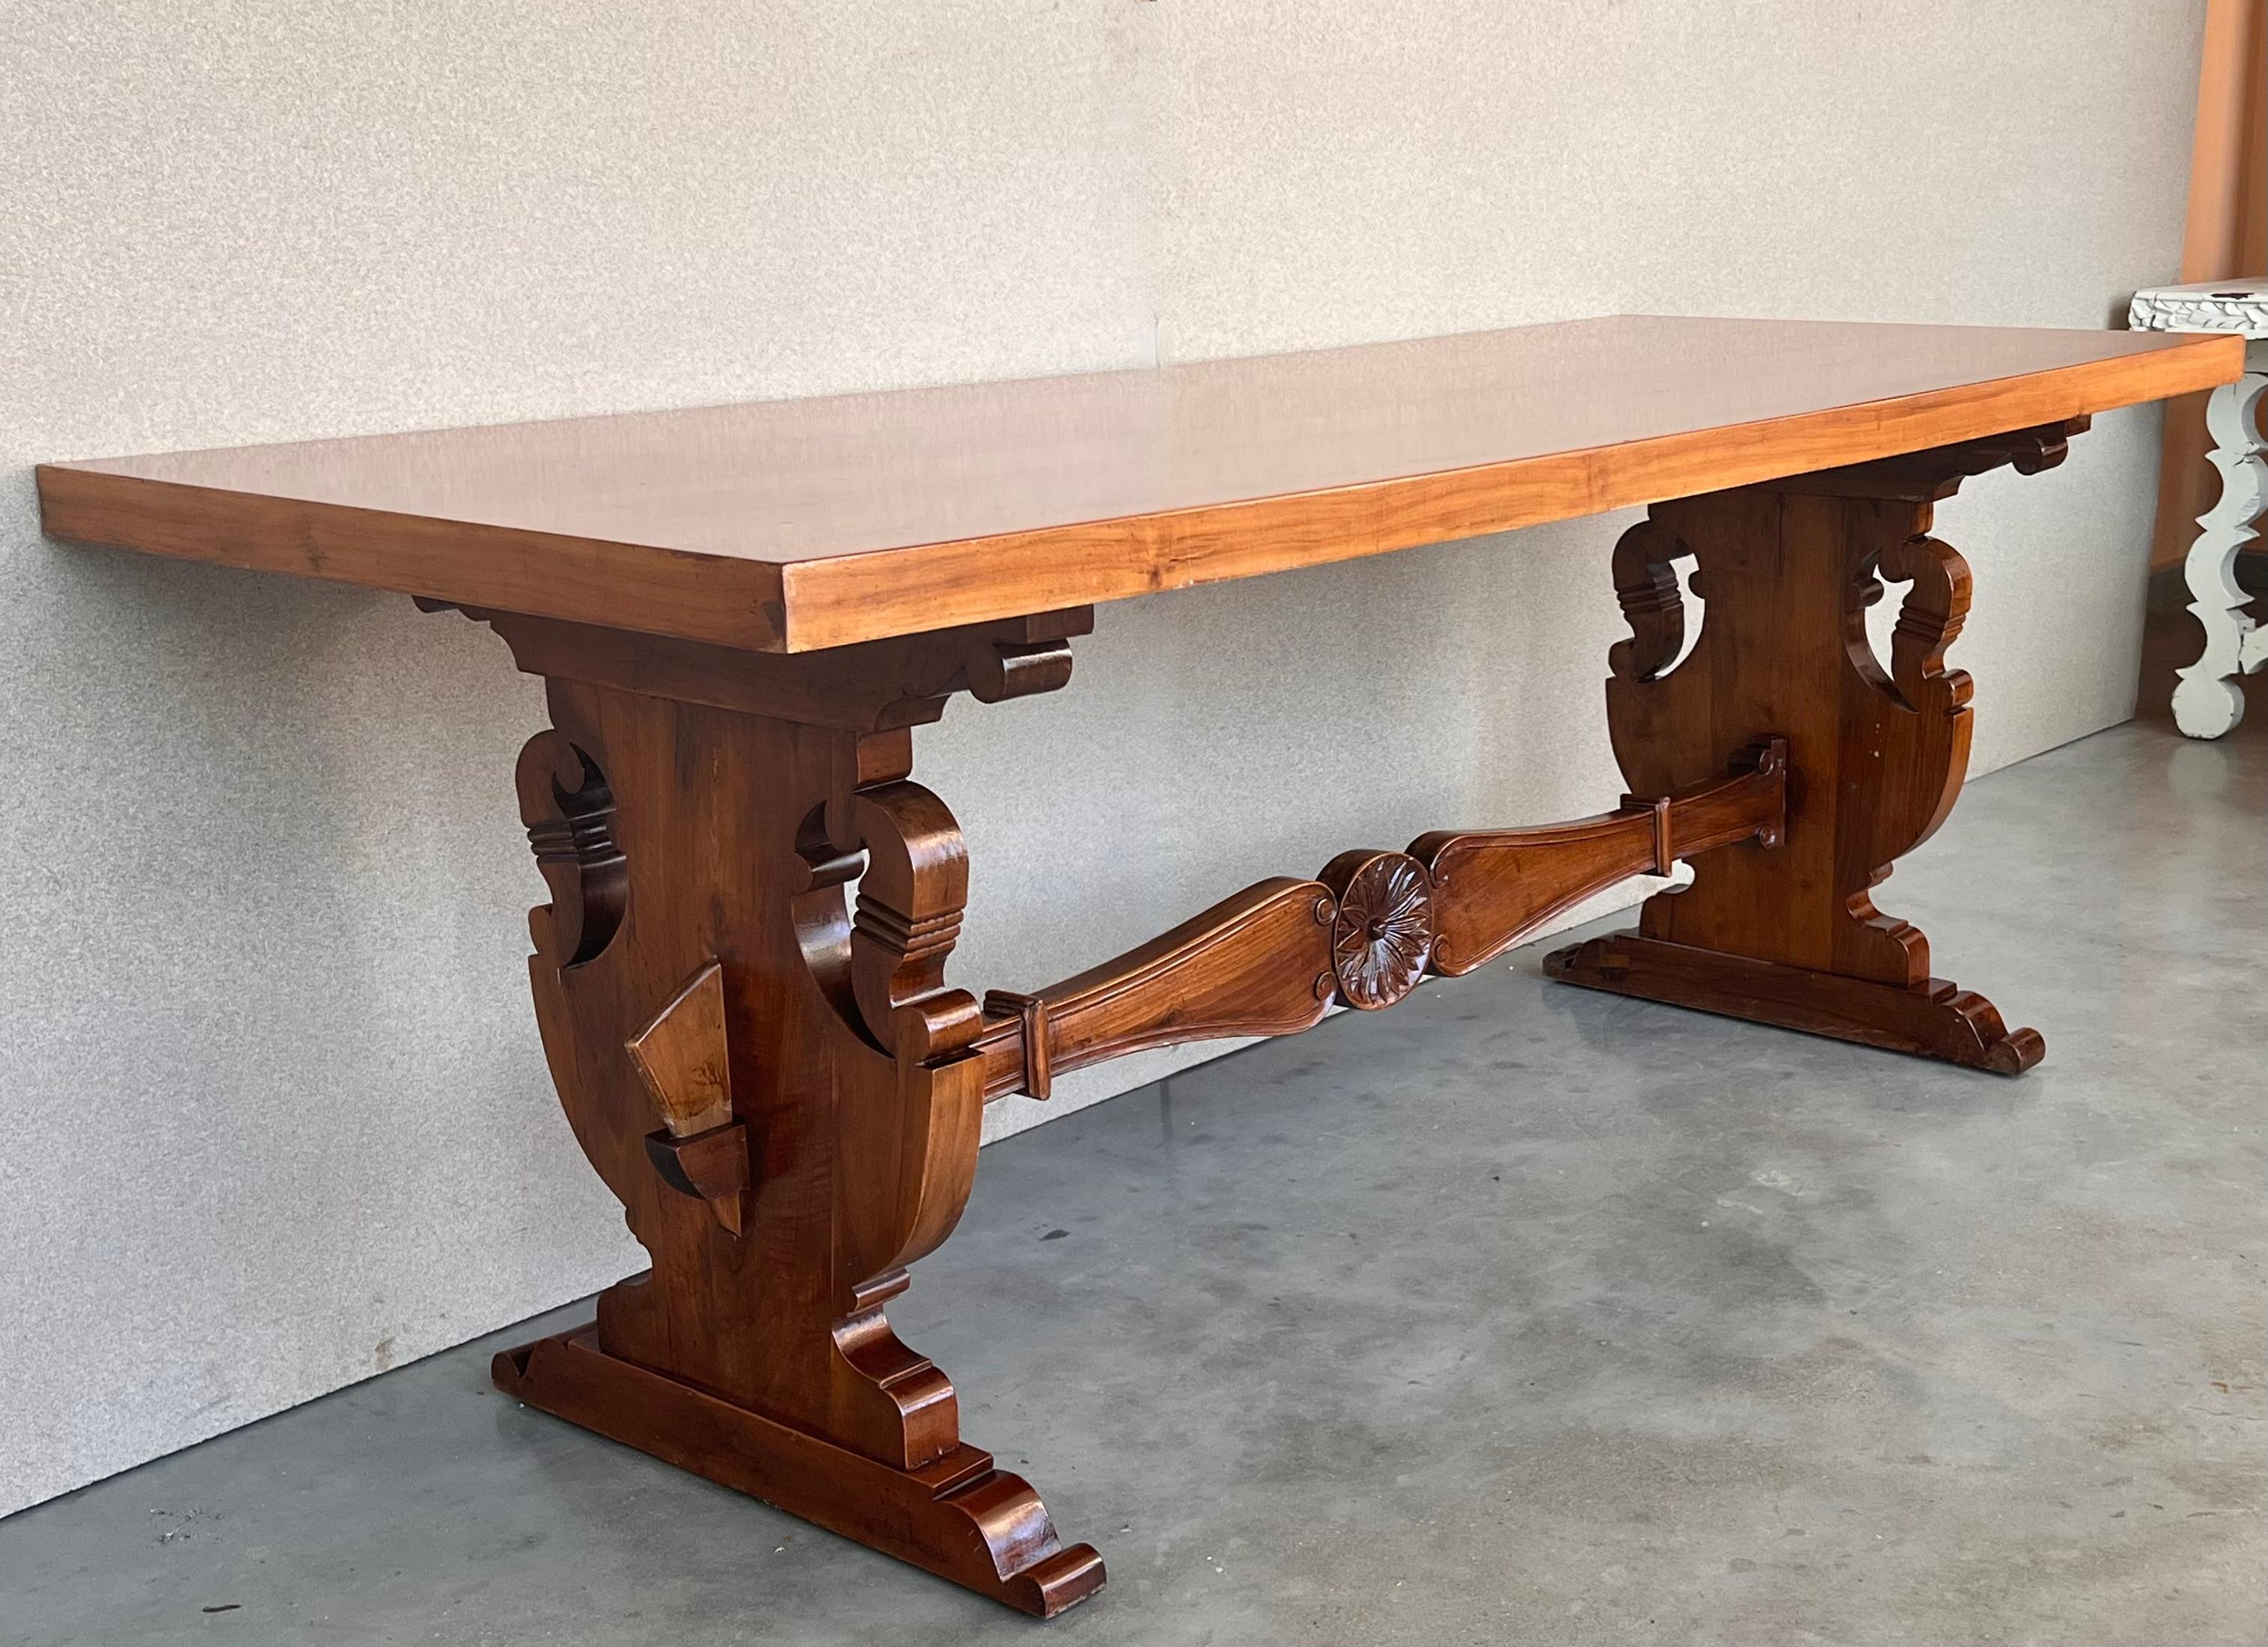 20th Century Spanish Baroque Carved Walnut Lyre Legs Trestle Dining Farm Table For Sale 2